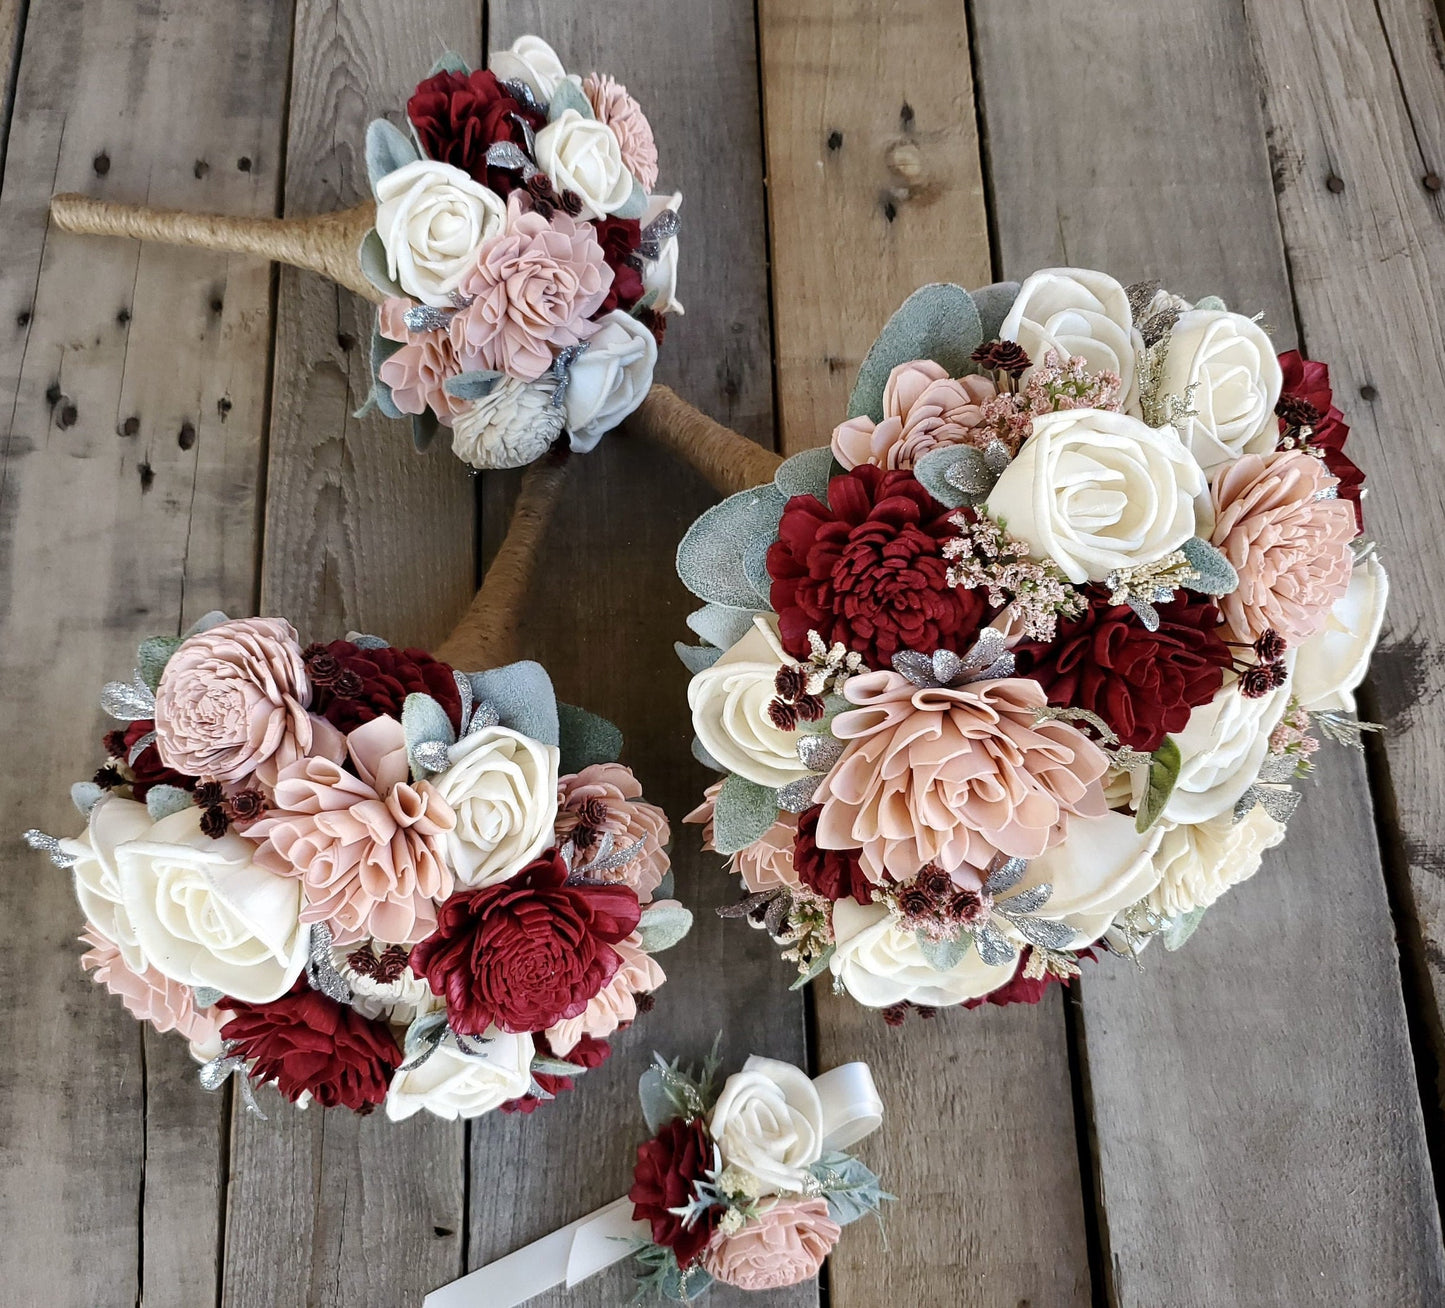 Burgundy and Blush Sola Wood Flower Bouquet, Bride and Bridesmaid Floral Wedding Bouquet